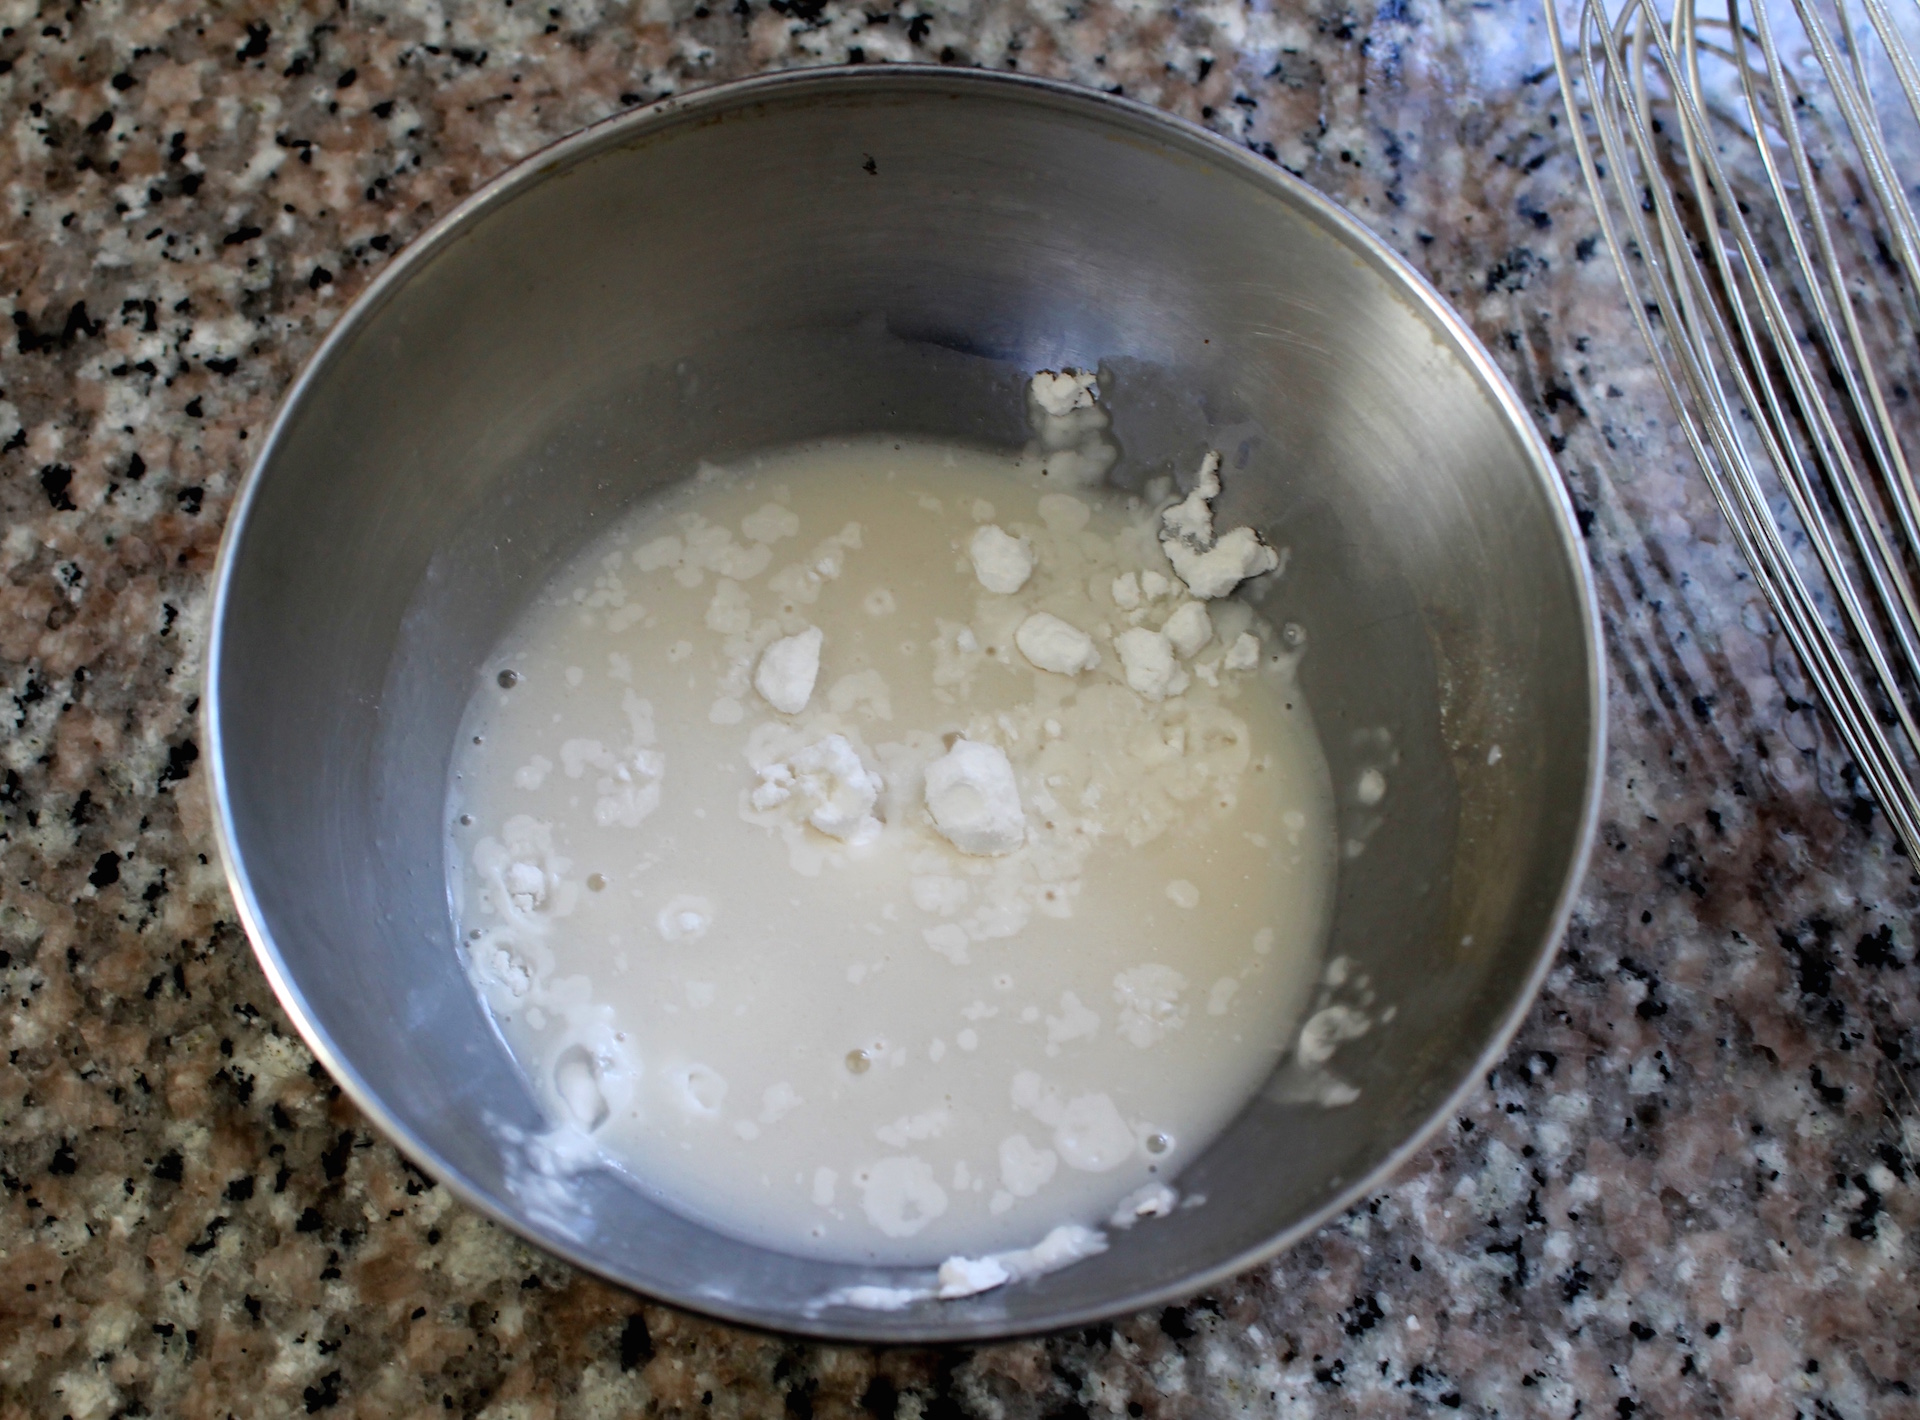 Tapioca needs to be stirred into a slurry before being added to the hot milk to keep the yogurt lump-free.